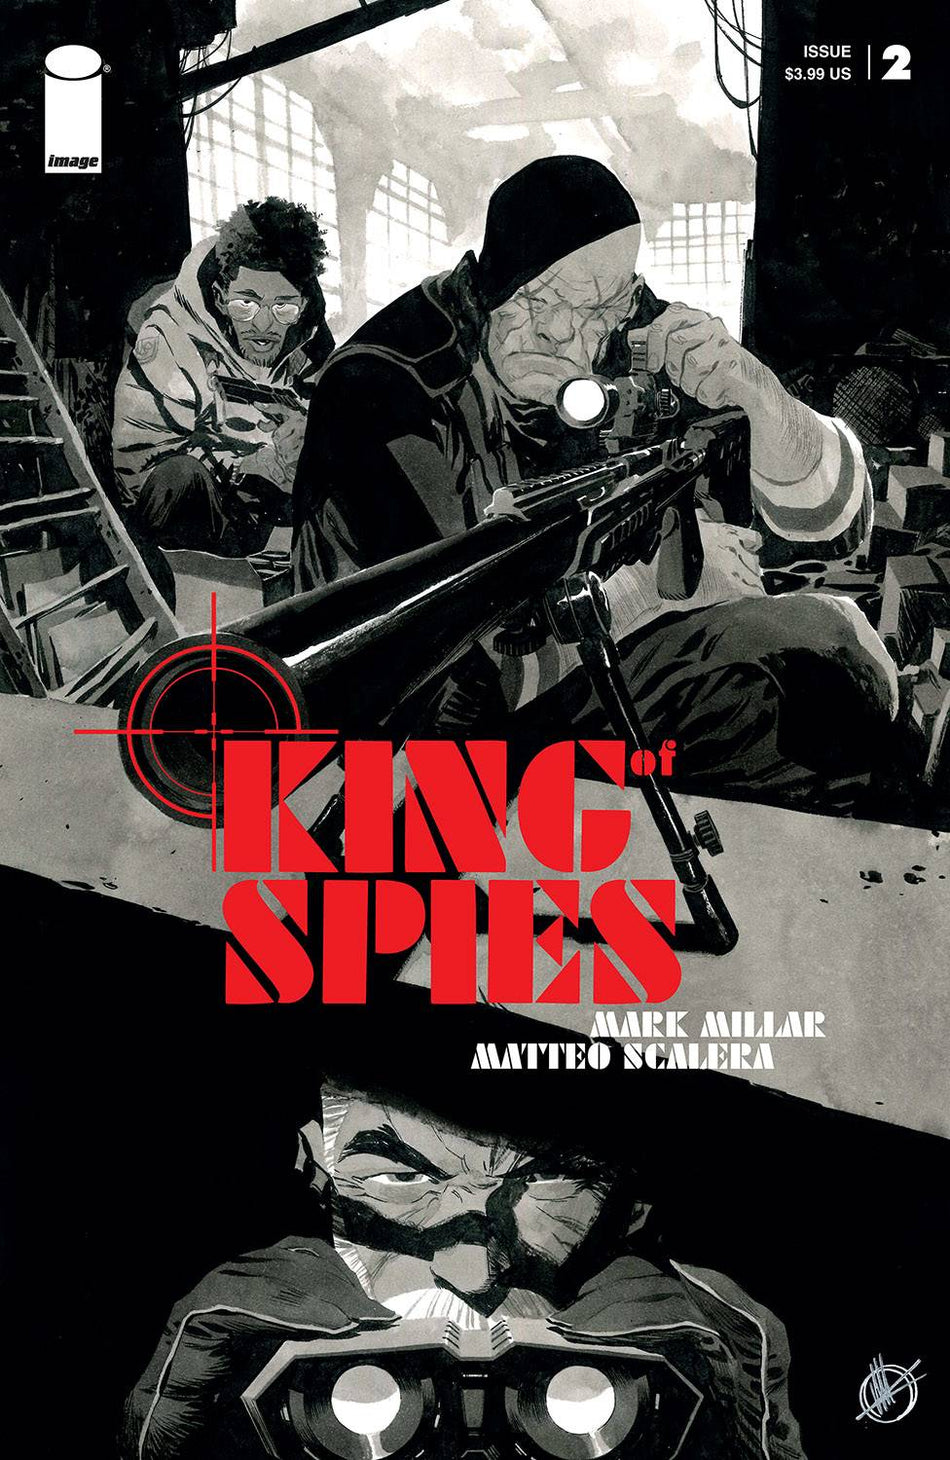 Photo of King of Spies Issue 2 (Of 4) CVR B Scalera B&W (MR) comic sold by Stronghold Collectibles